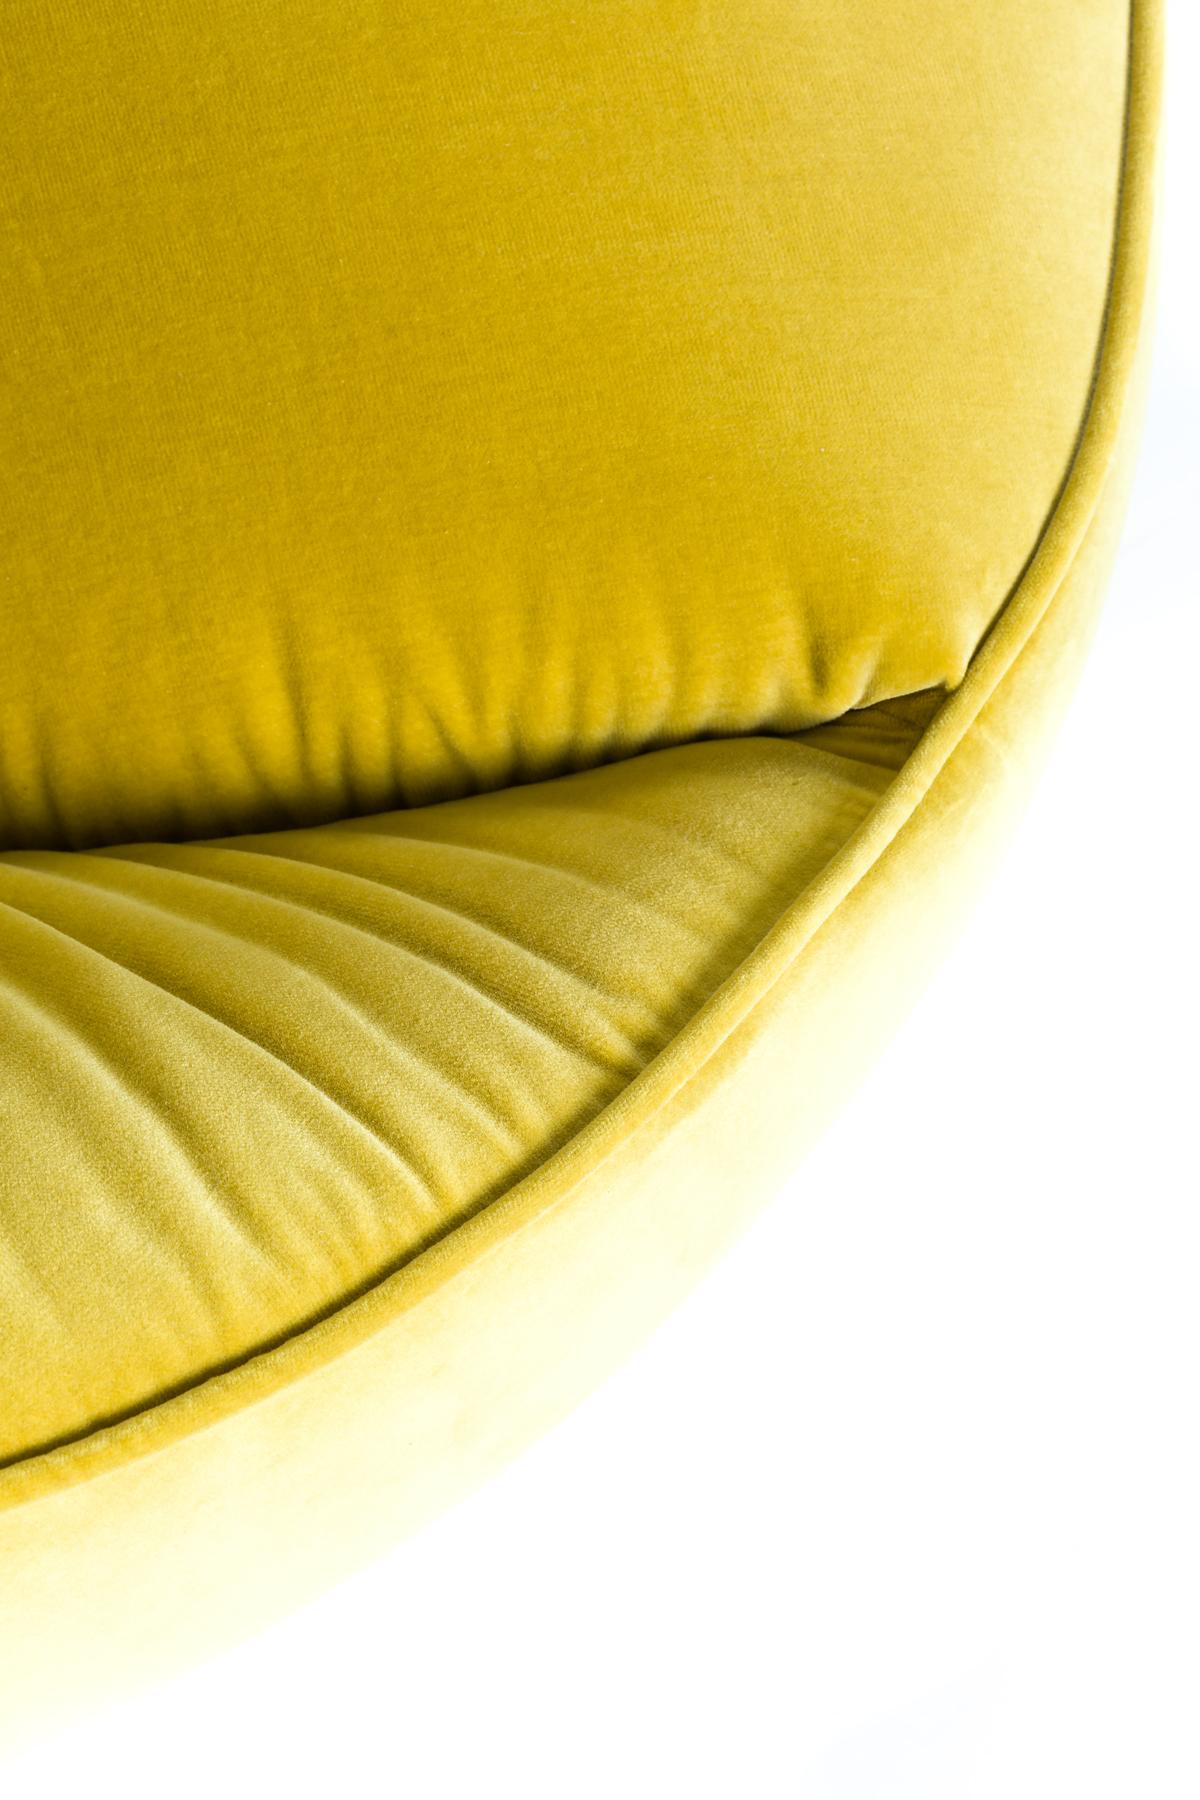 Modern Moooi Hana Wingback Chair in Harald 3, 443 Yellow Upholstery For Sale